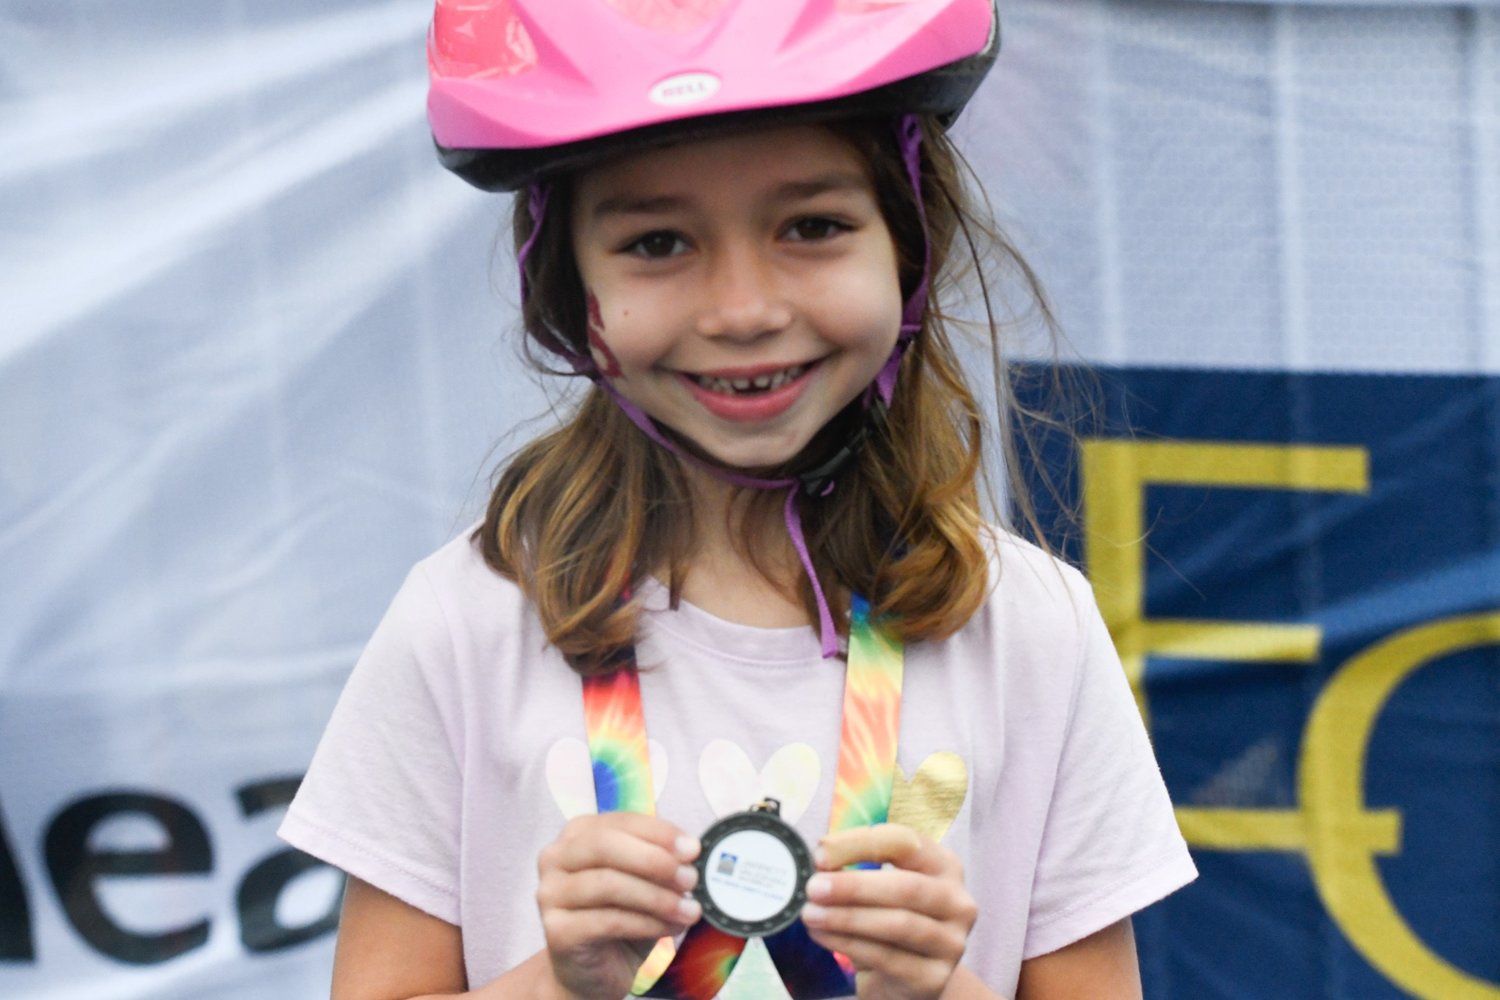 Children’s bike race participant Harper Siedle, 5, of Doylestown shows off her medal.